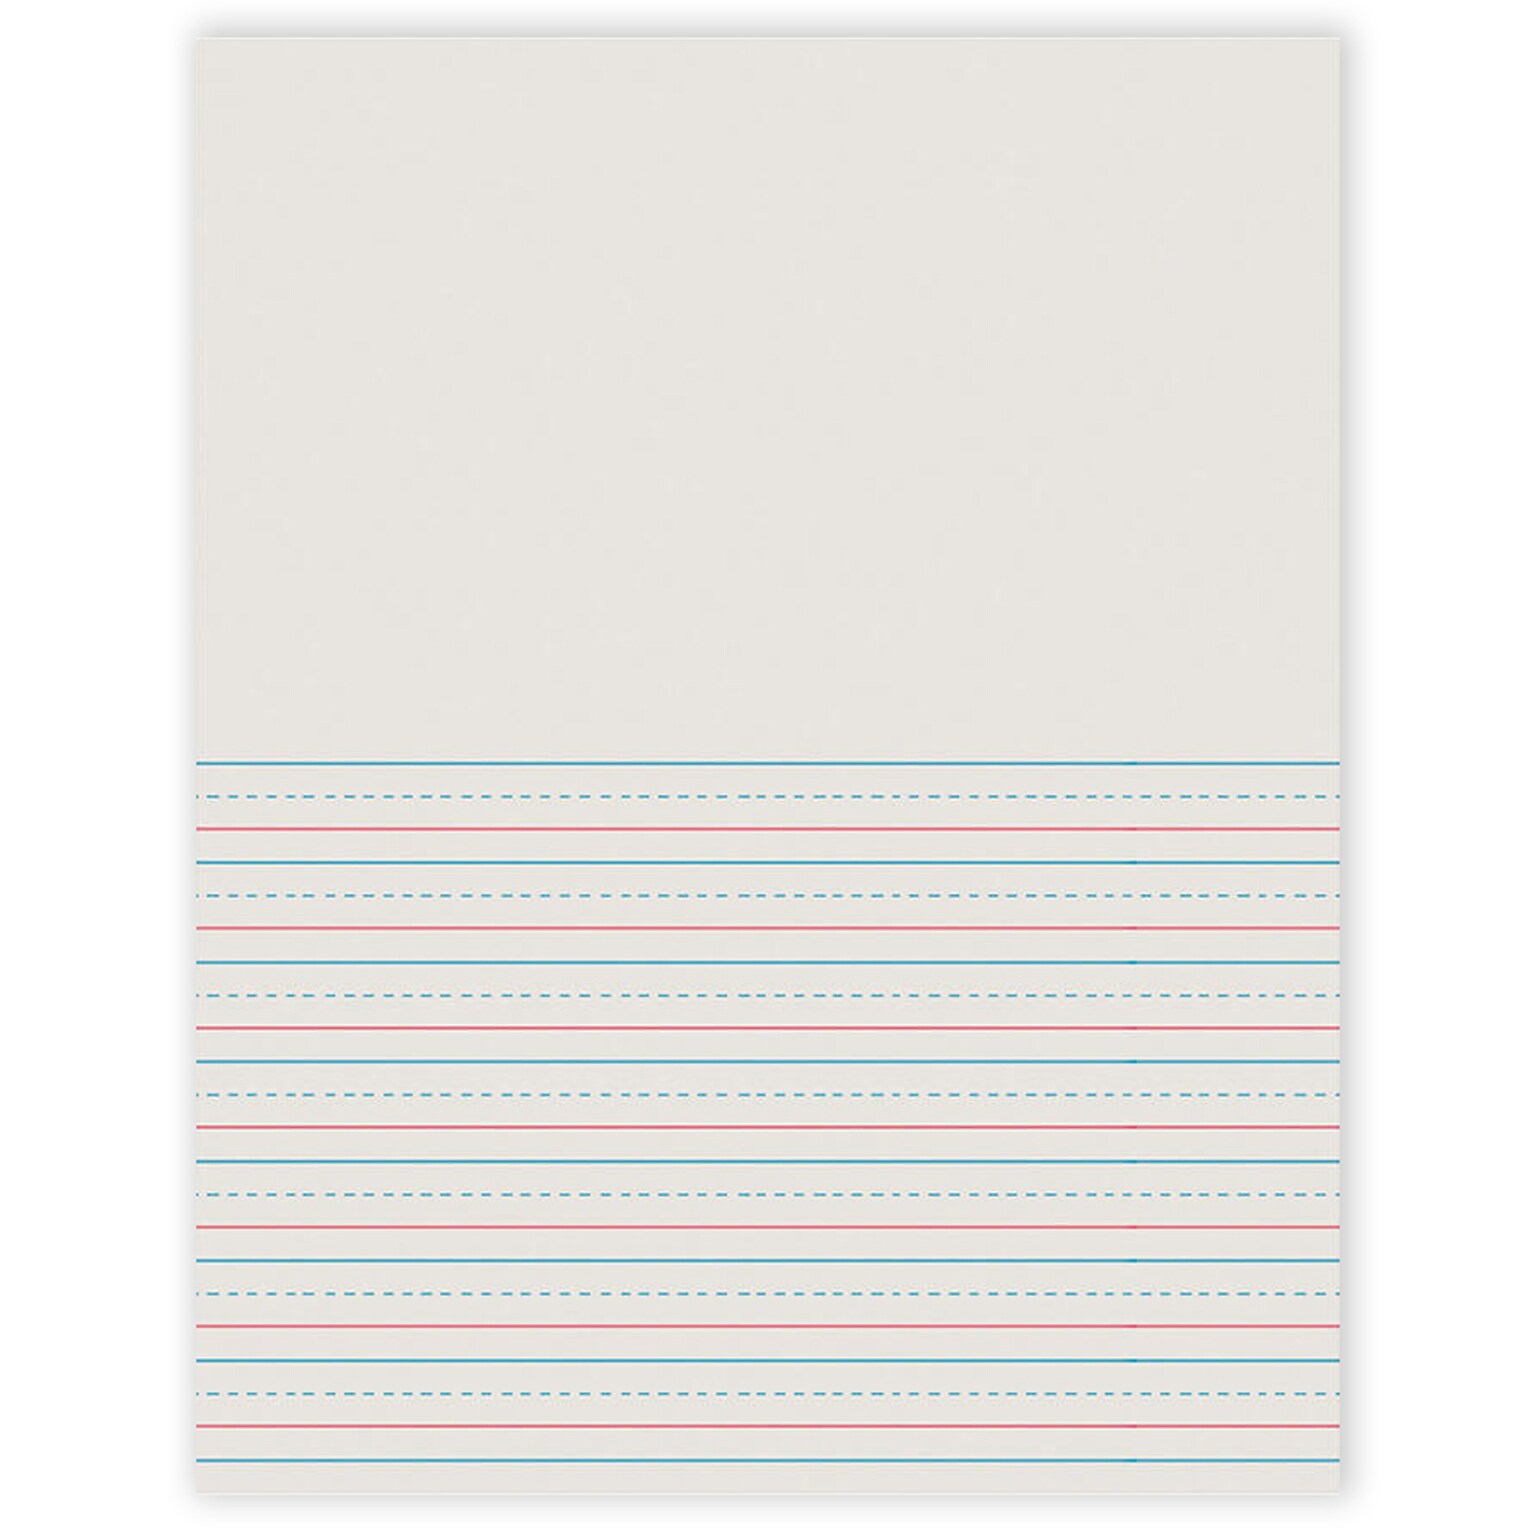 Pacon Storybook Paper for DNealian Programs, White, 1/2 Short Way Ruled, 11 x 8 1/2, 1500 Sheets/Pack (PAC2695)